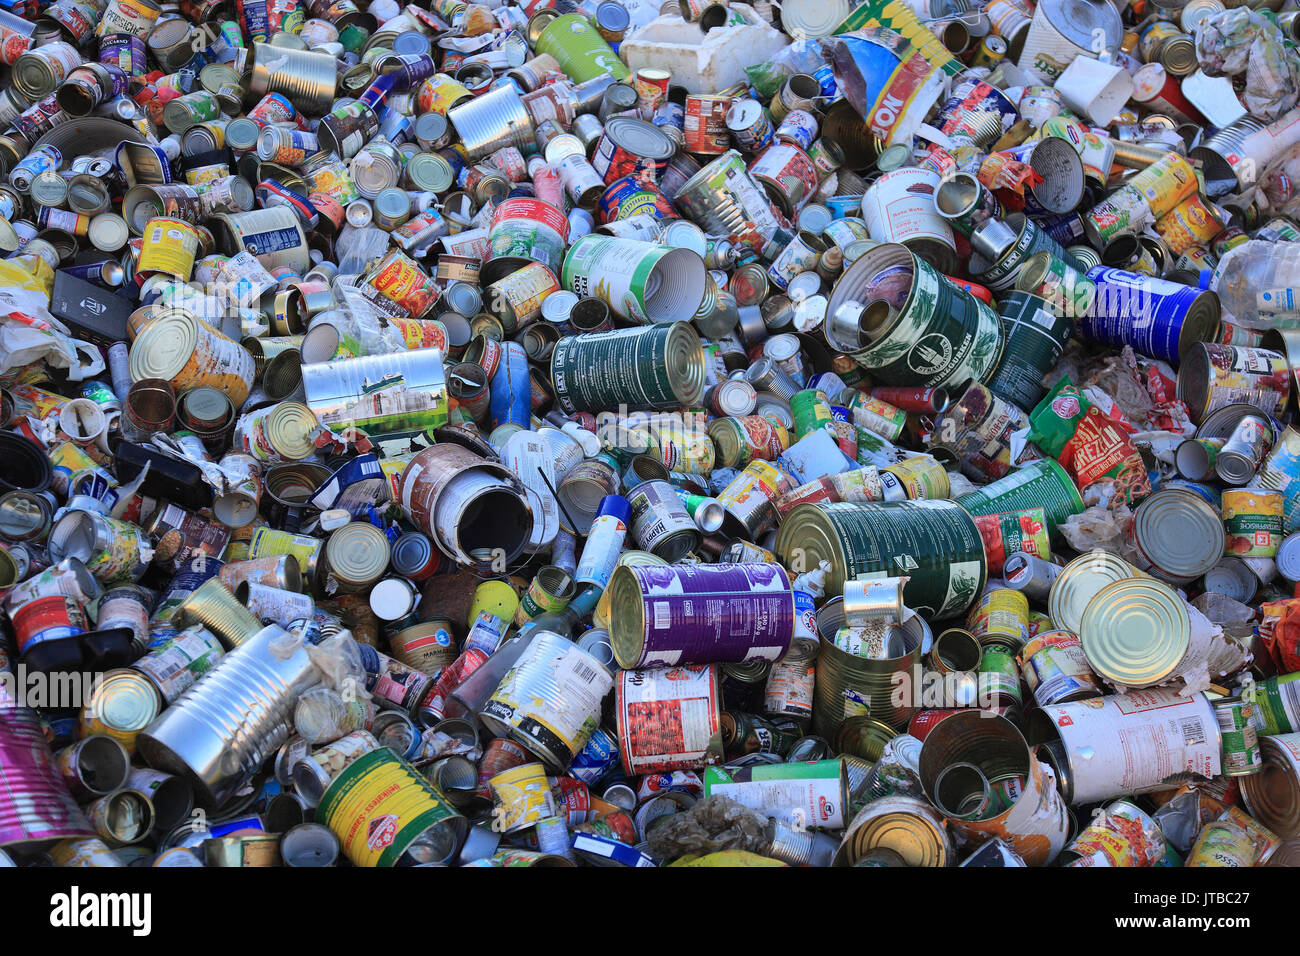 Waste industry, stock to the recycling, drinks cans, tin plate, Abfallwirtschaft, Lager zum Recycling, Getraenkedosen, Weissblech Stock Photo